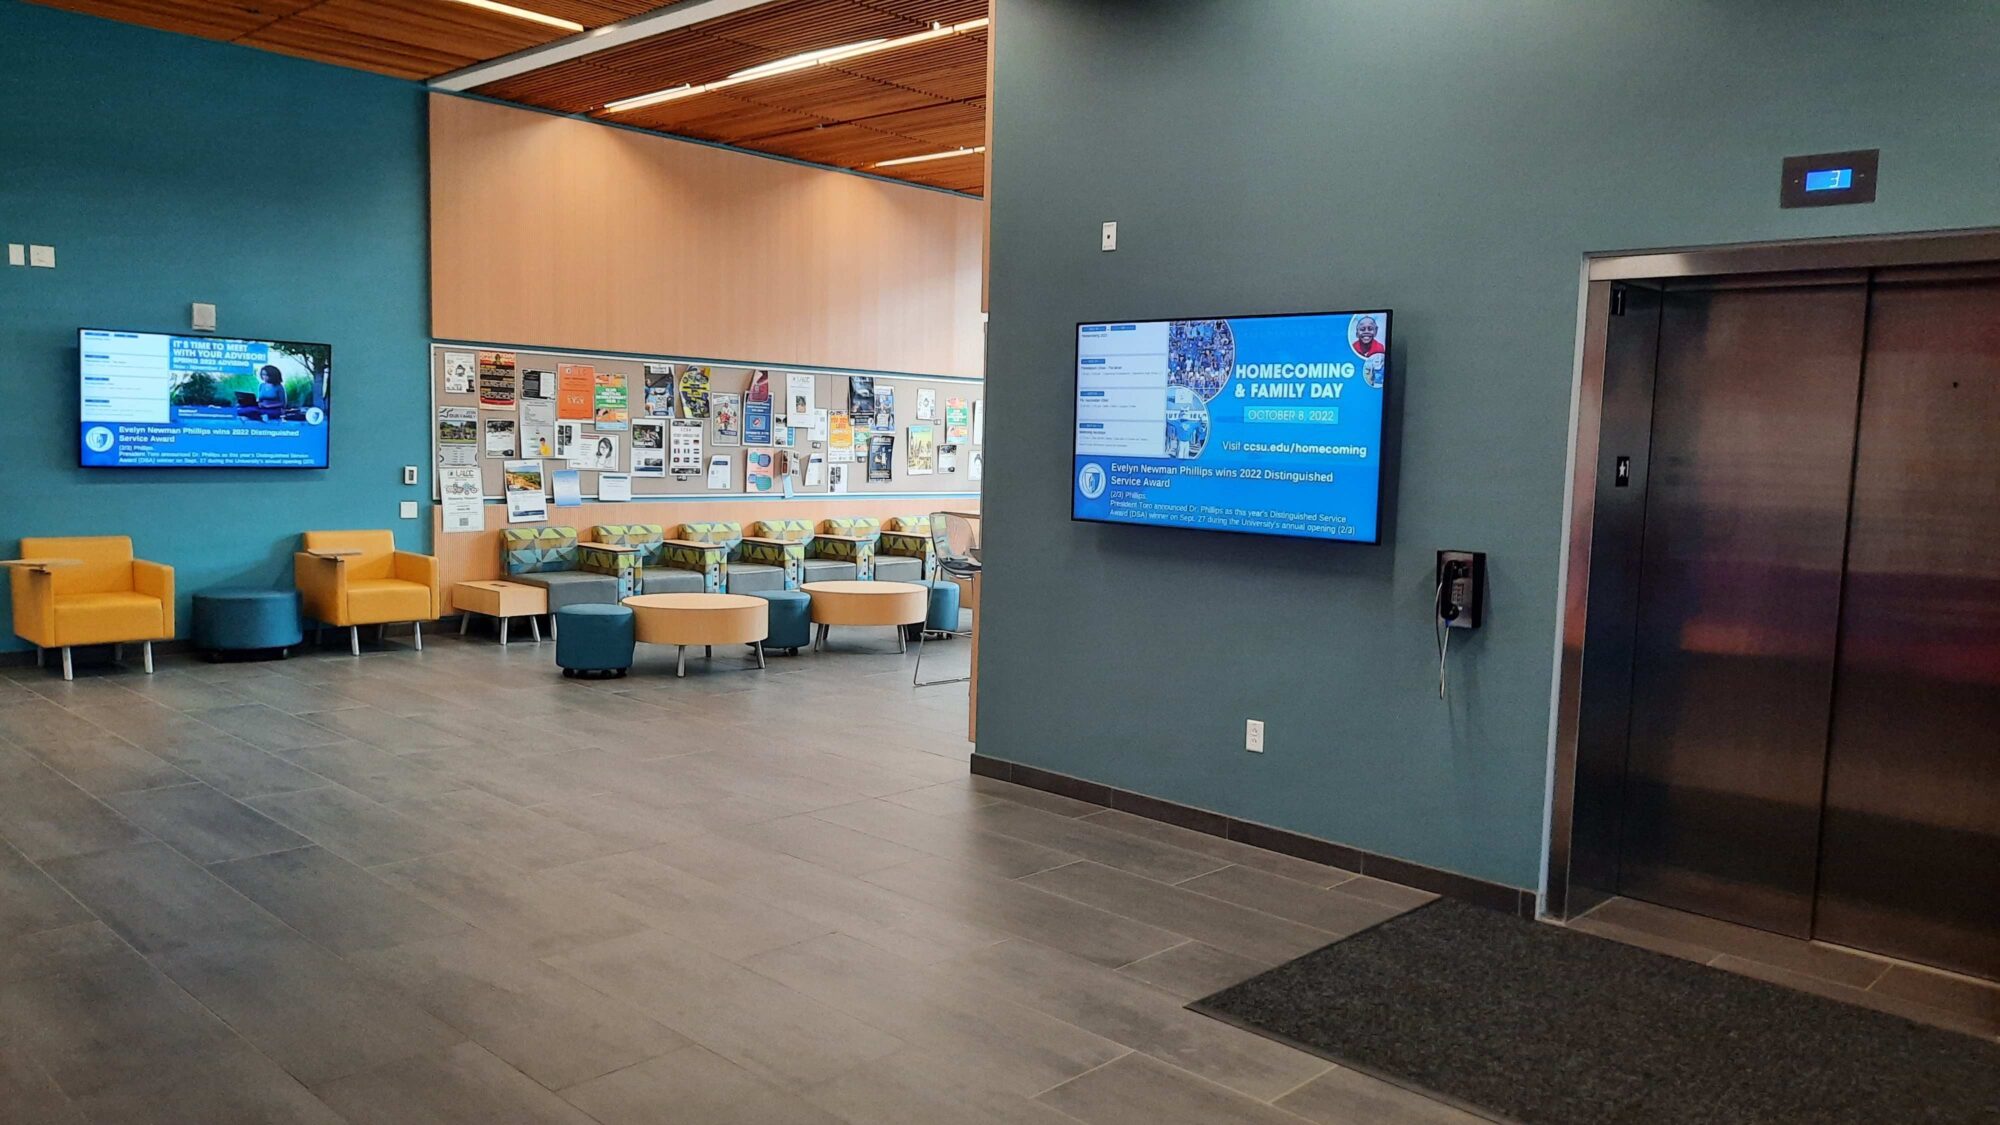 CCSU streamlines and simplifies campus-wide communications across 155 endpoints, while broadening the capabilities of its digital signage network with Carousel Cloud software